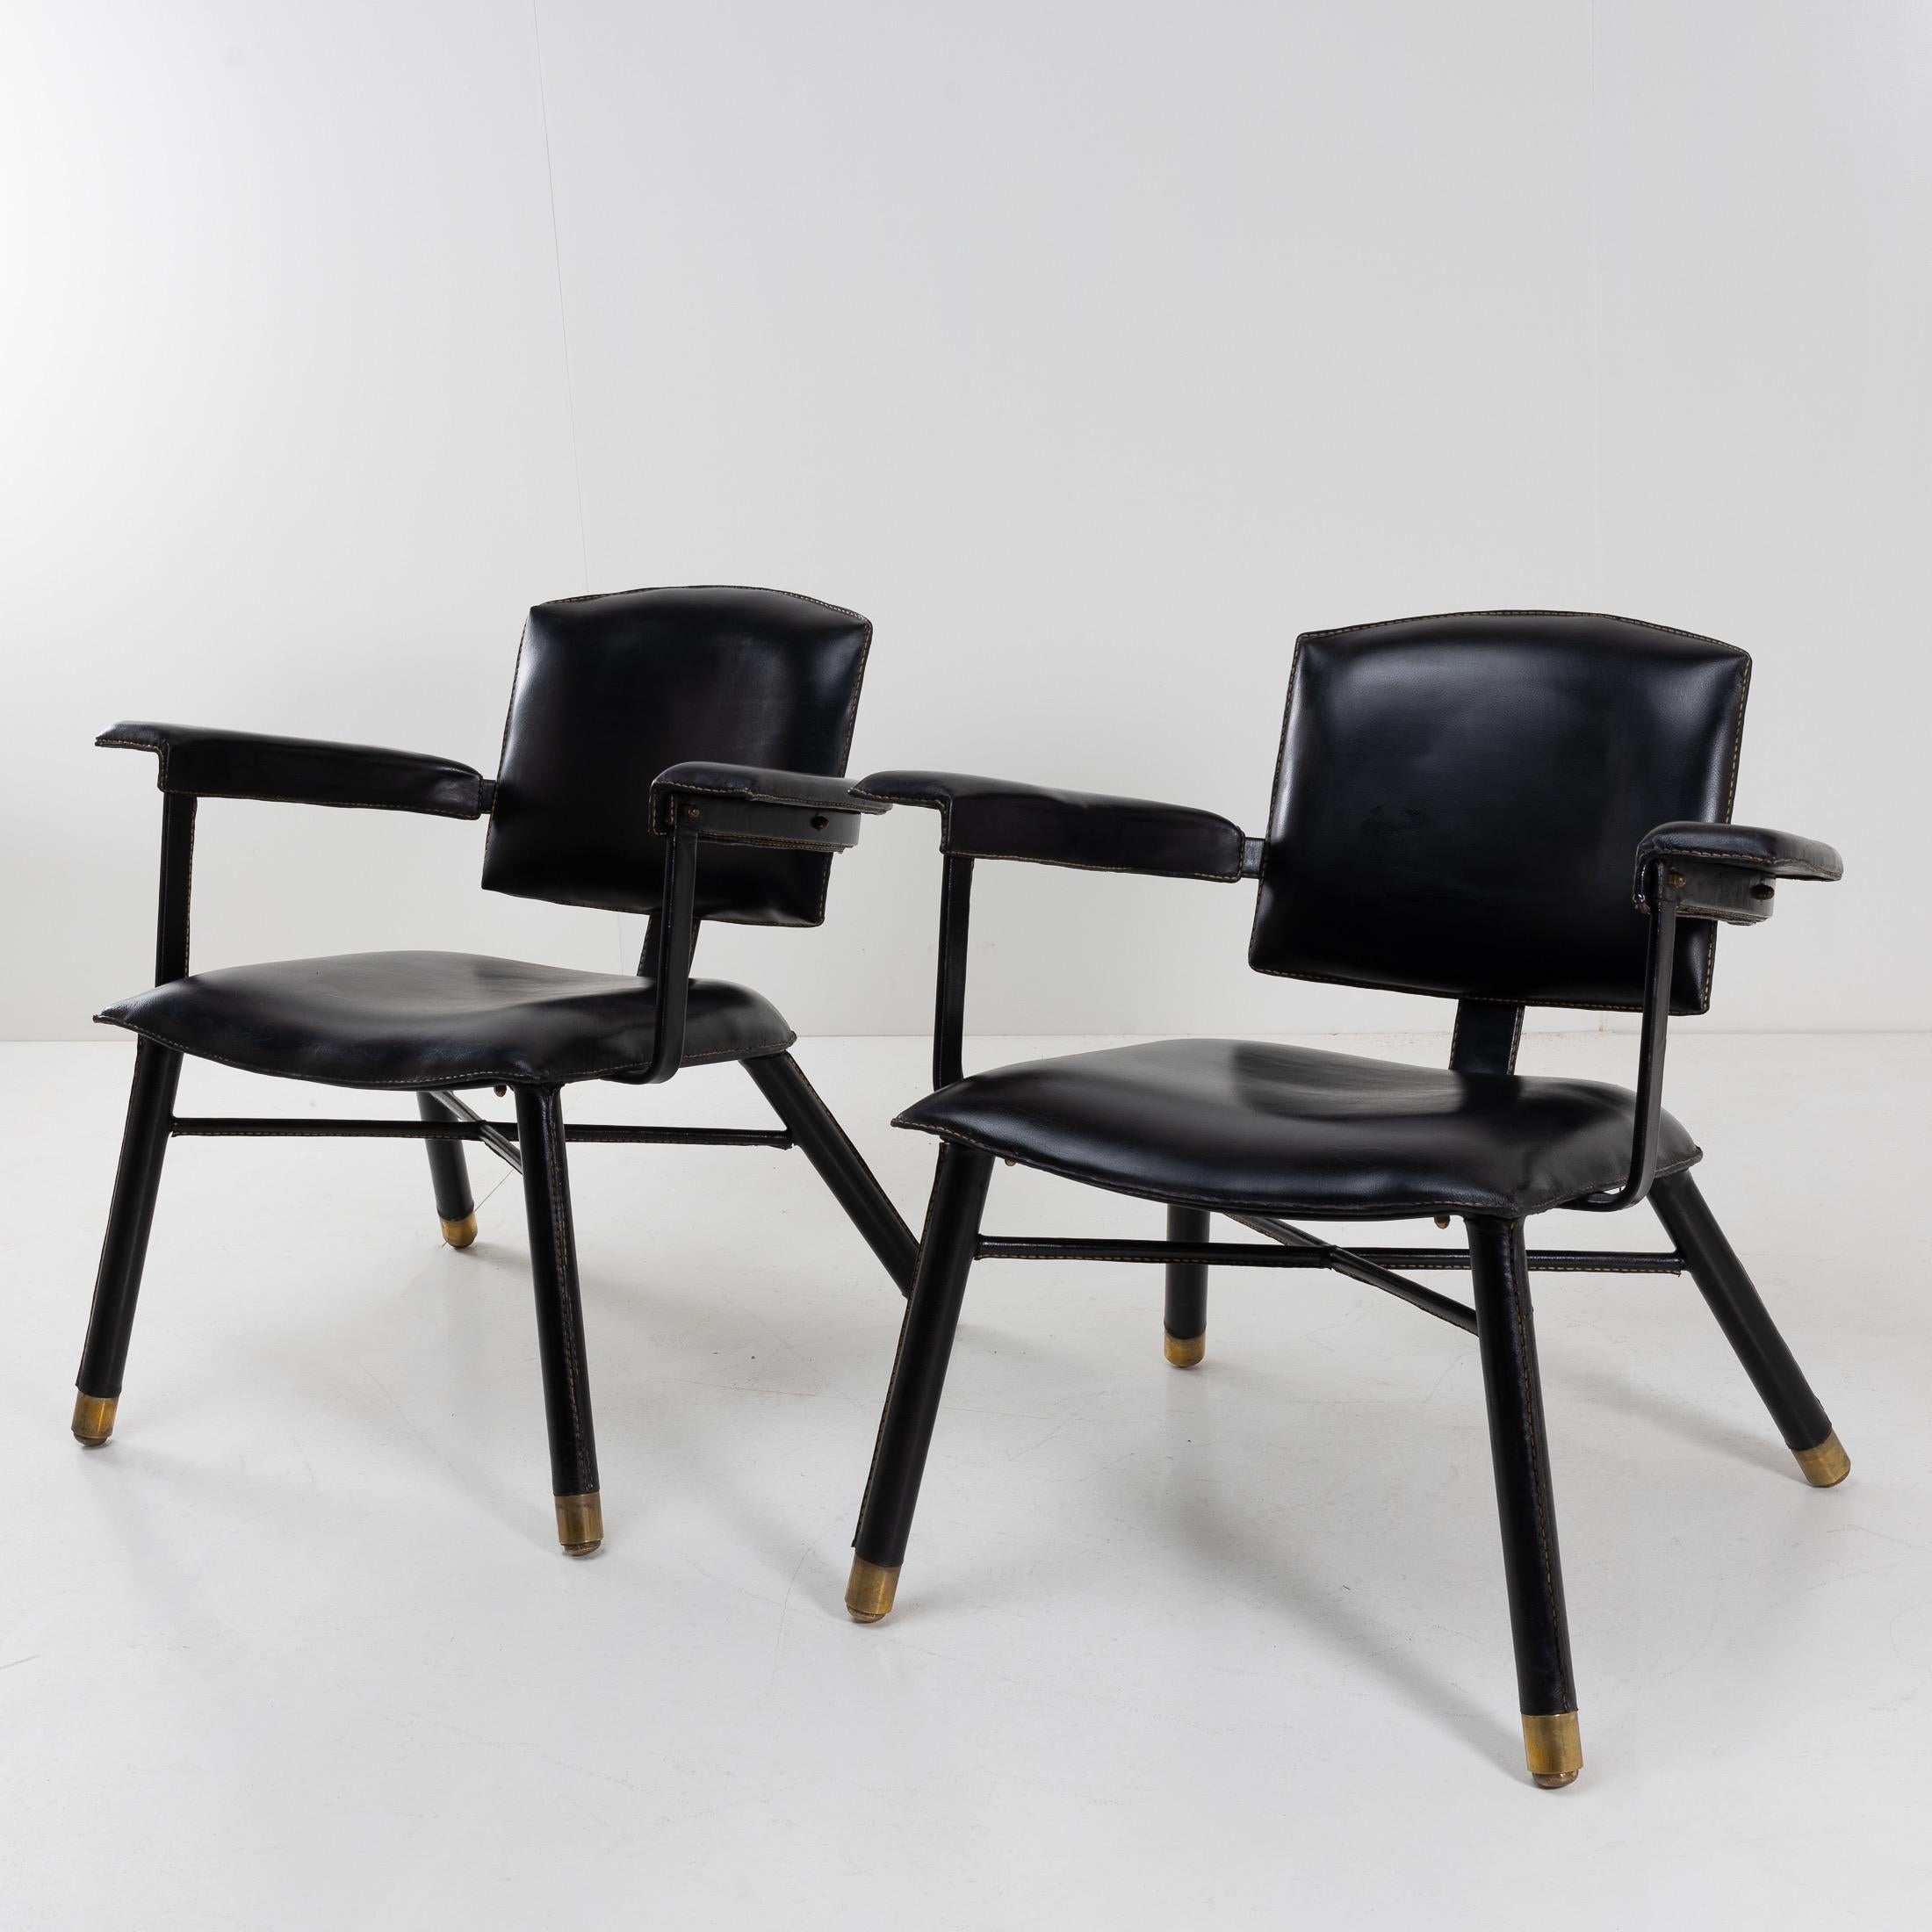 Mid-Century Modern Pair of Black Leather Armchairs Called “Chauffeuse” by Jacques Adnet